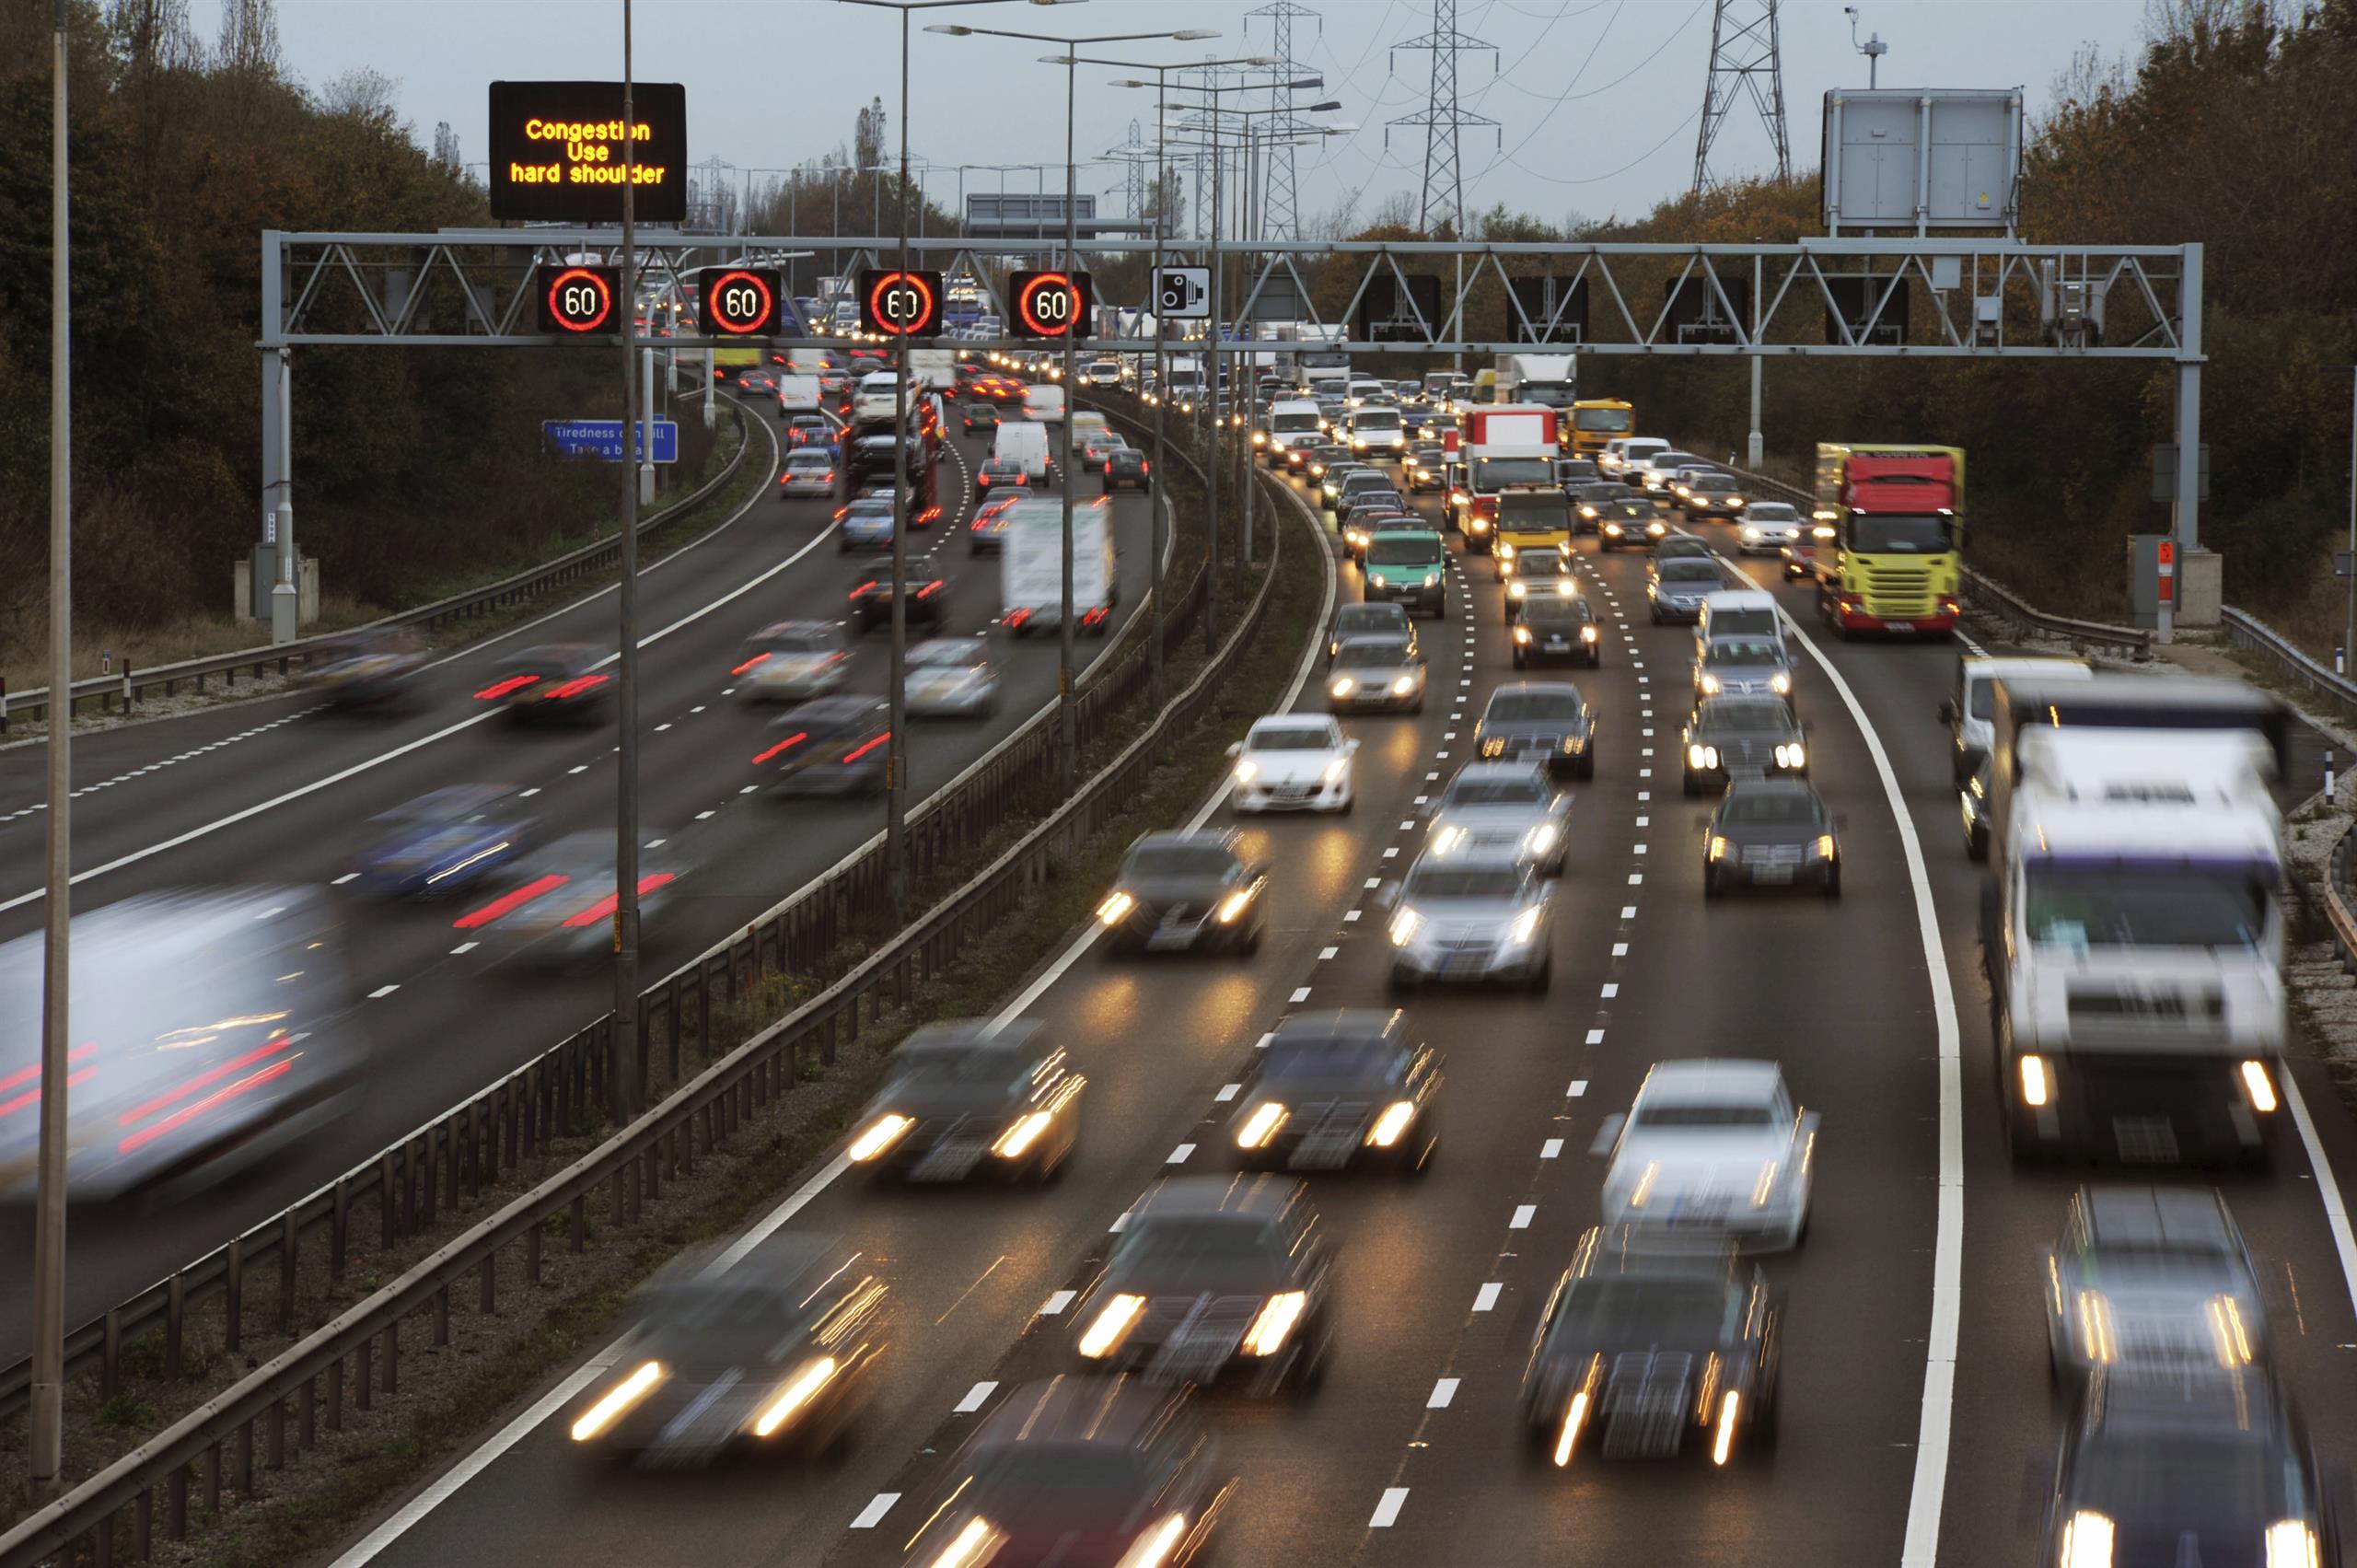 Congestion on the M6 highway